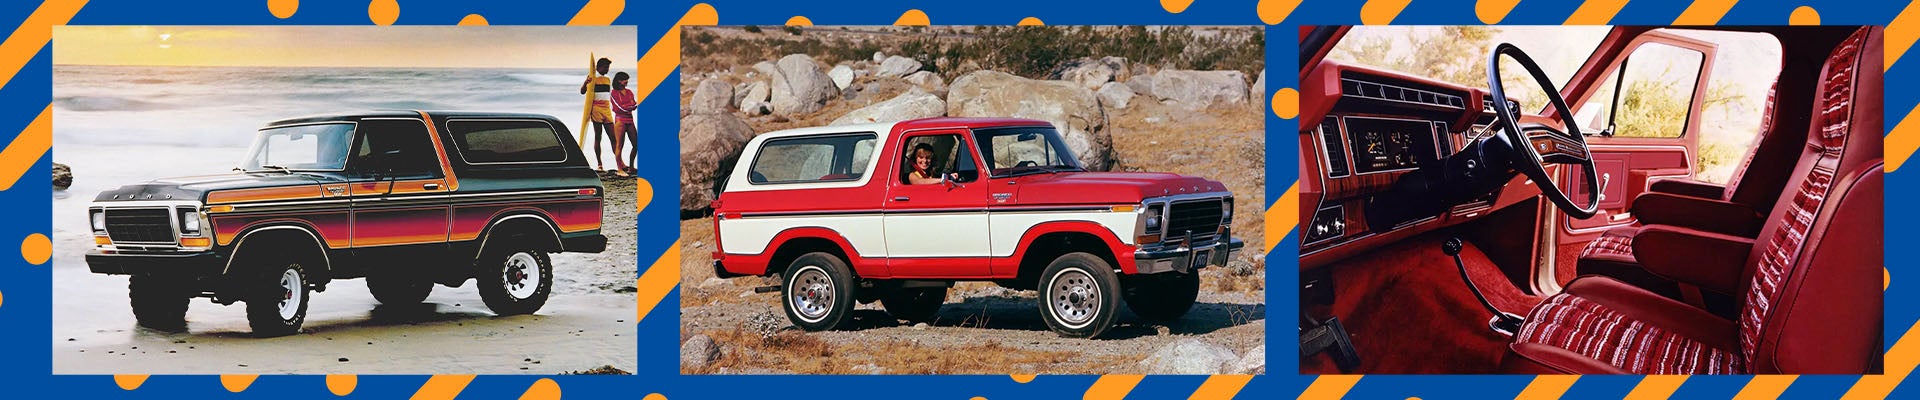 2021 Ford Bronco release date